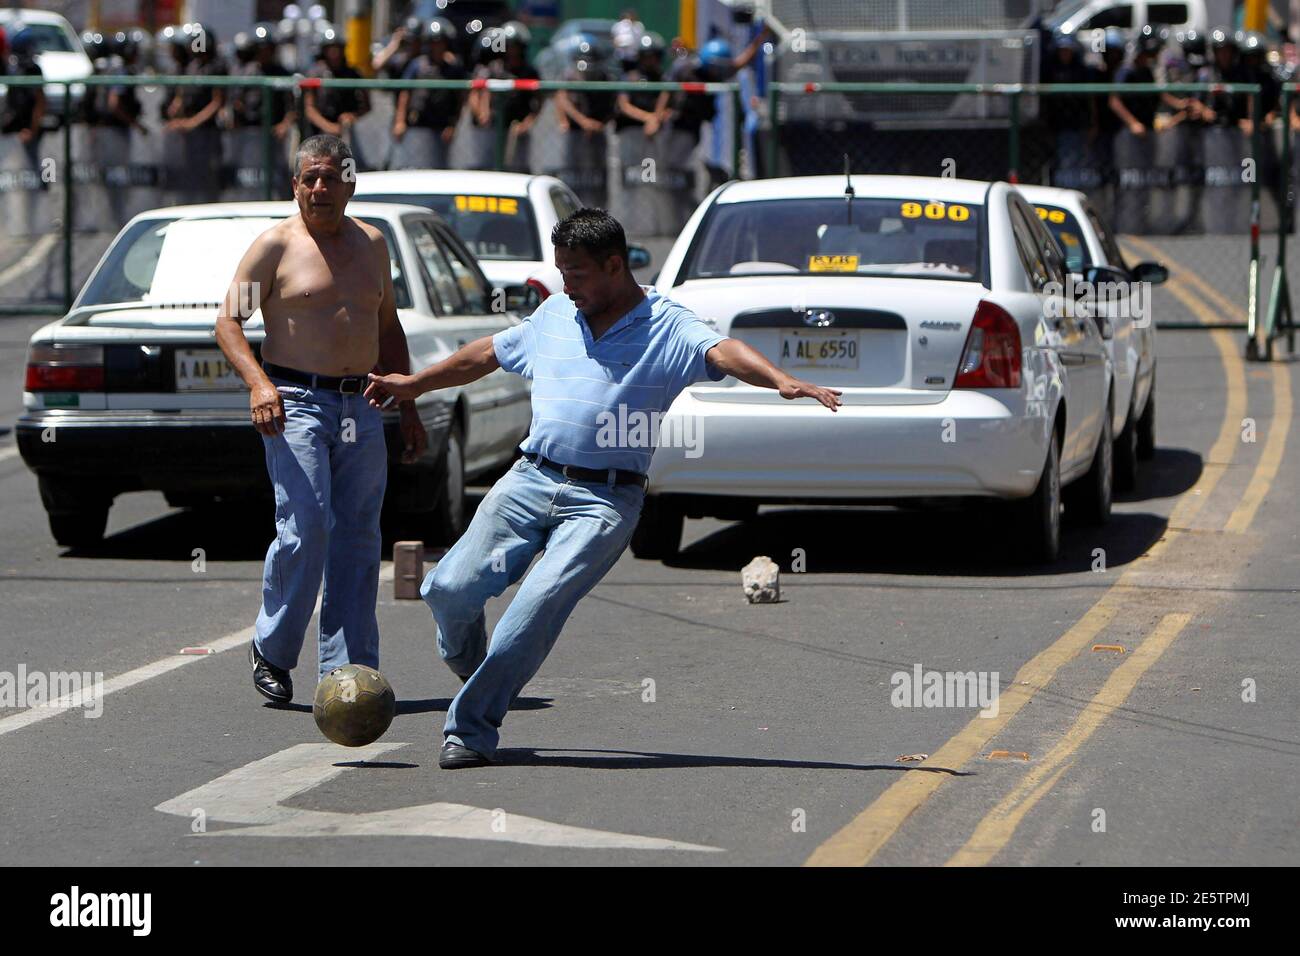 Taxi drivers play soccer during a strike outside the presidential house in Tegucigalpa February 28, 2011. The taxi drivers are demanding the government of President Porfirio Lobo pay a bonus to offset rising fuel prices, according to the Honduran Association of taxi drivers (ATAXISH). According to the Deputy Minister of Industry and Trade Juan Jose Cruz, the rise in fuel prices is due to the political crisis in the Middle East.  REUTERS/Edgard Garrido   (HONDURAS - Tags: POLITICS CIVIL UNREST TRANSPORT) Stock Photo